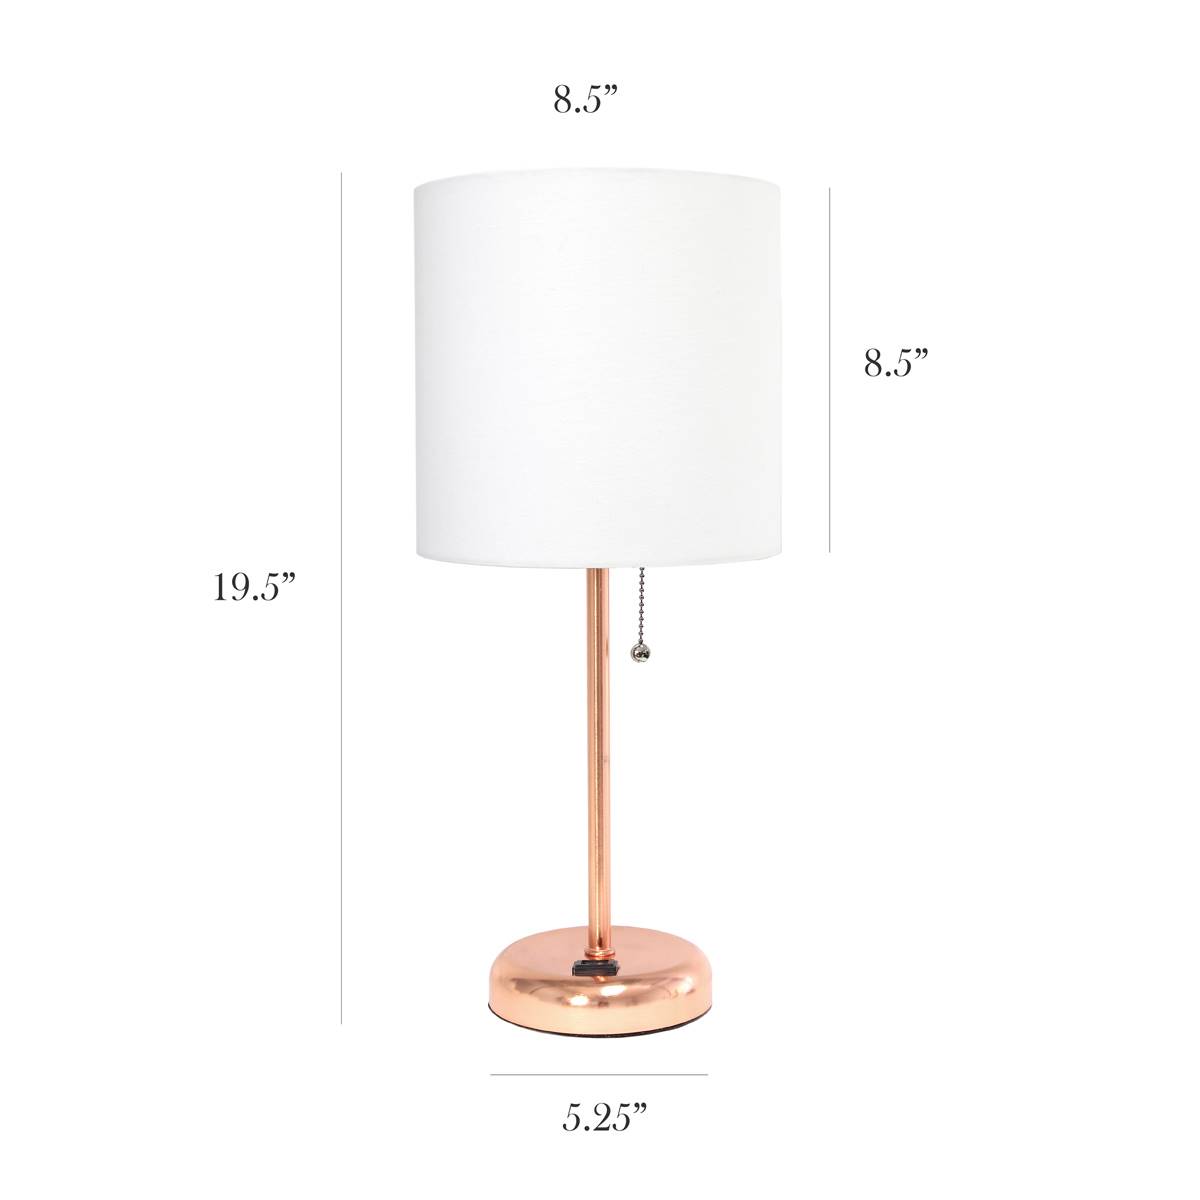 LimeLights Rose Gold Stick Lamp W/Charging Outlet & Fabric Shade